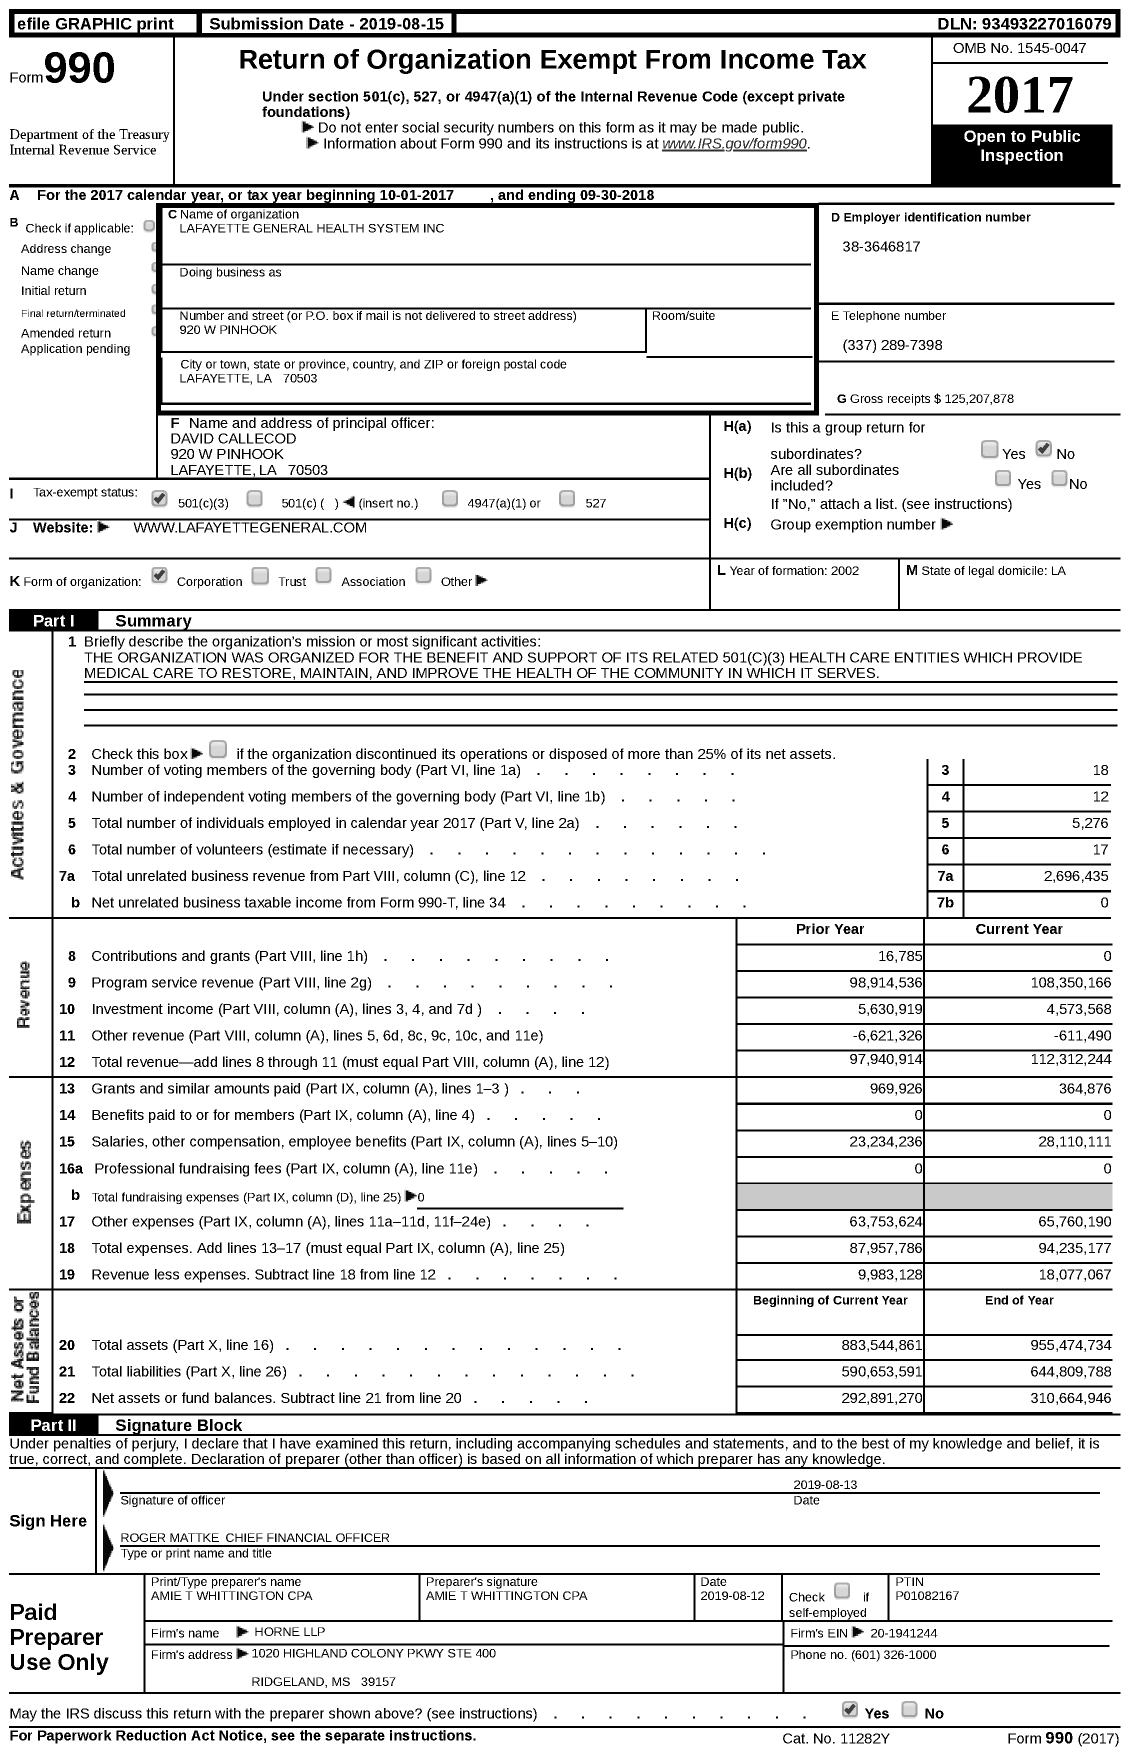 Image of first page of 2017 Form 990 for Ochsner Lafayette Health System (LGH)